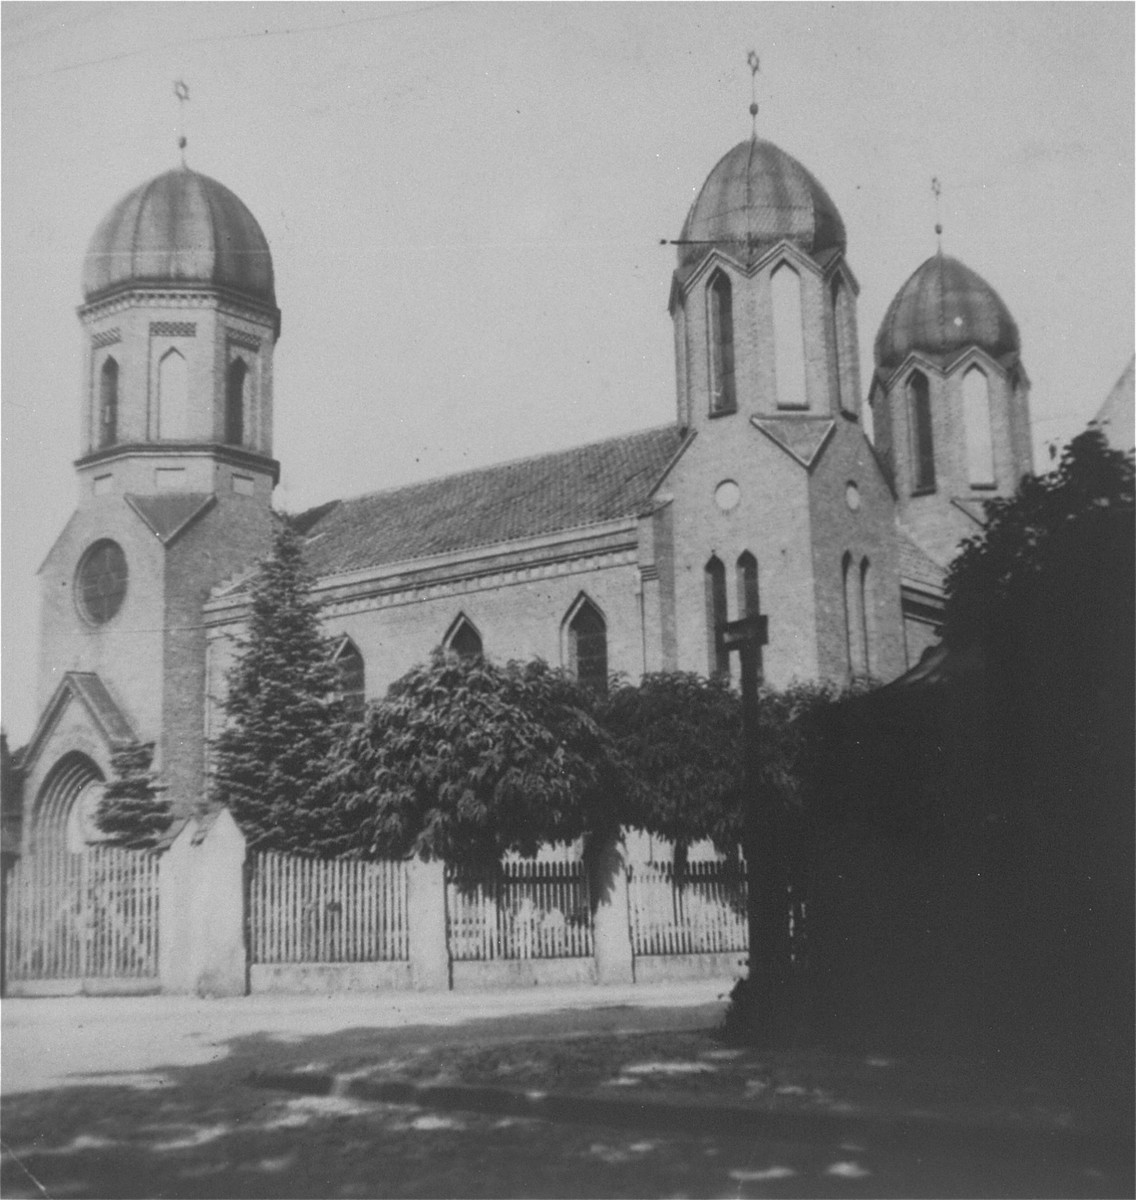 View of the synagogue in Rastenburg, East Prussia.